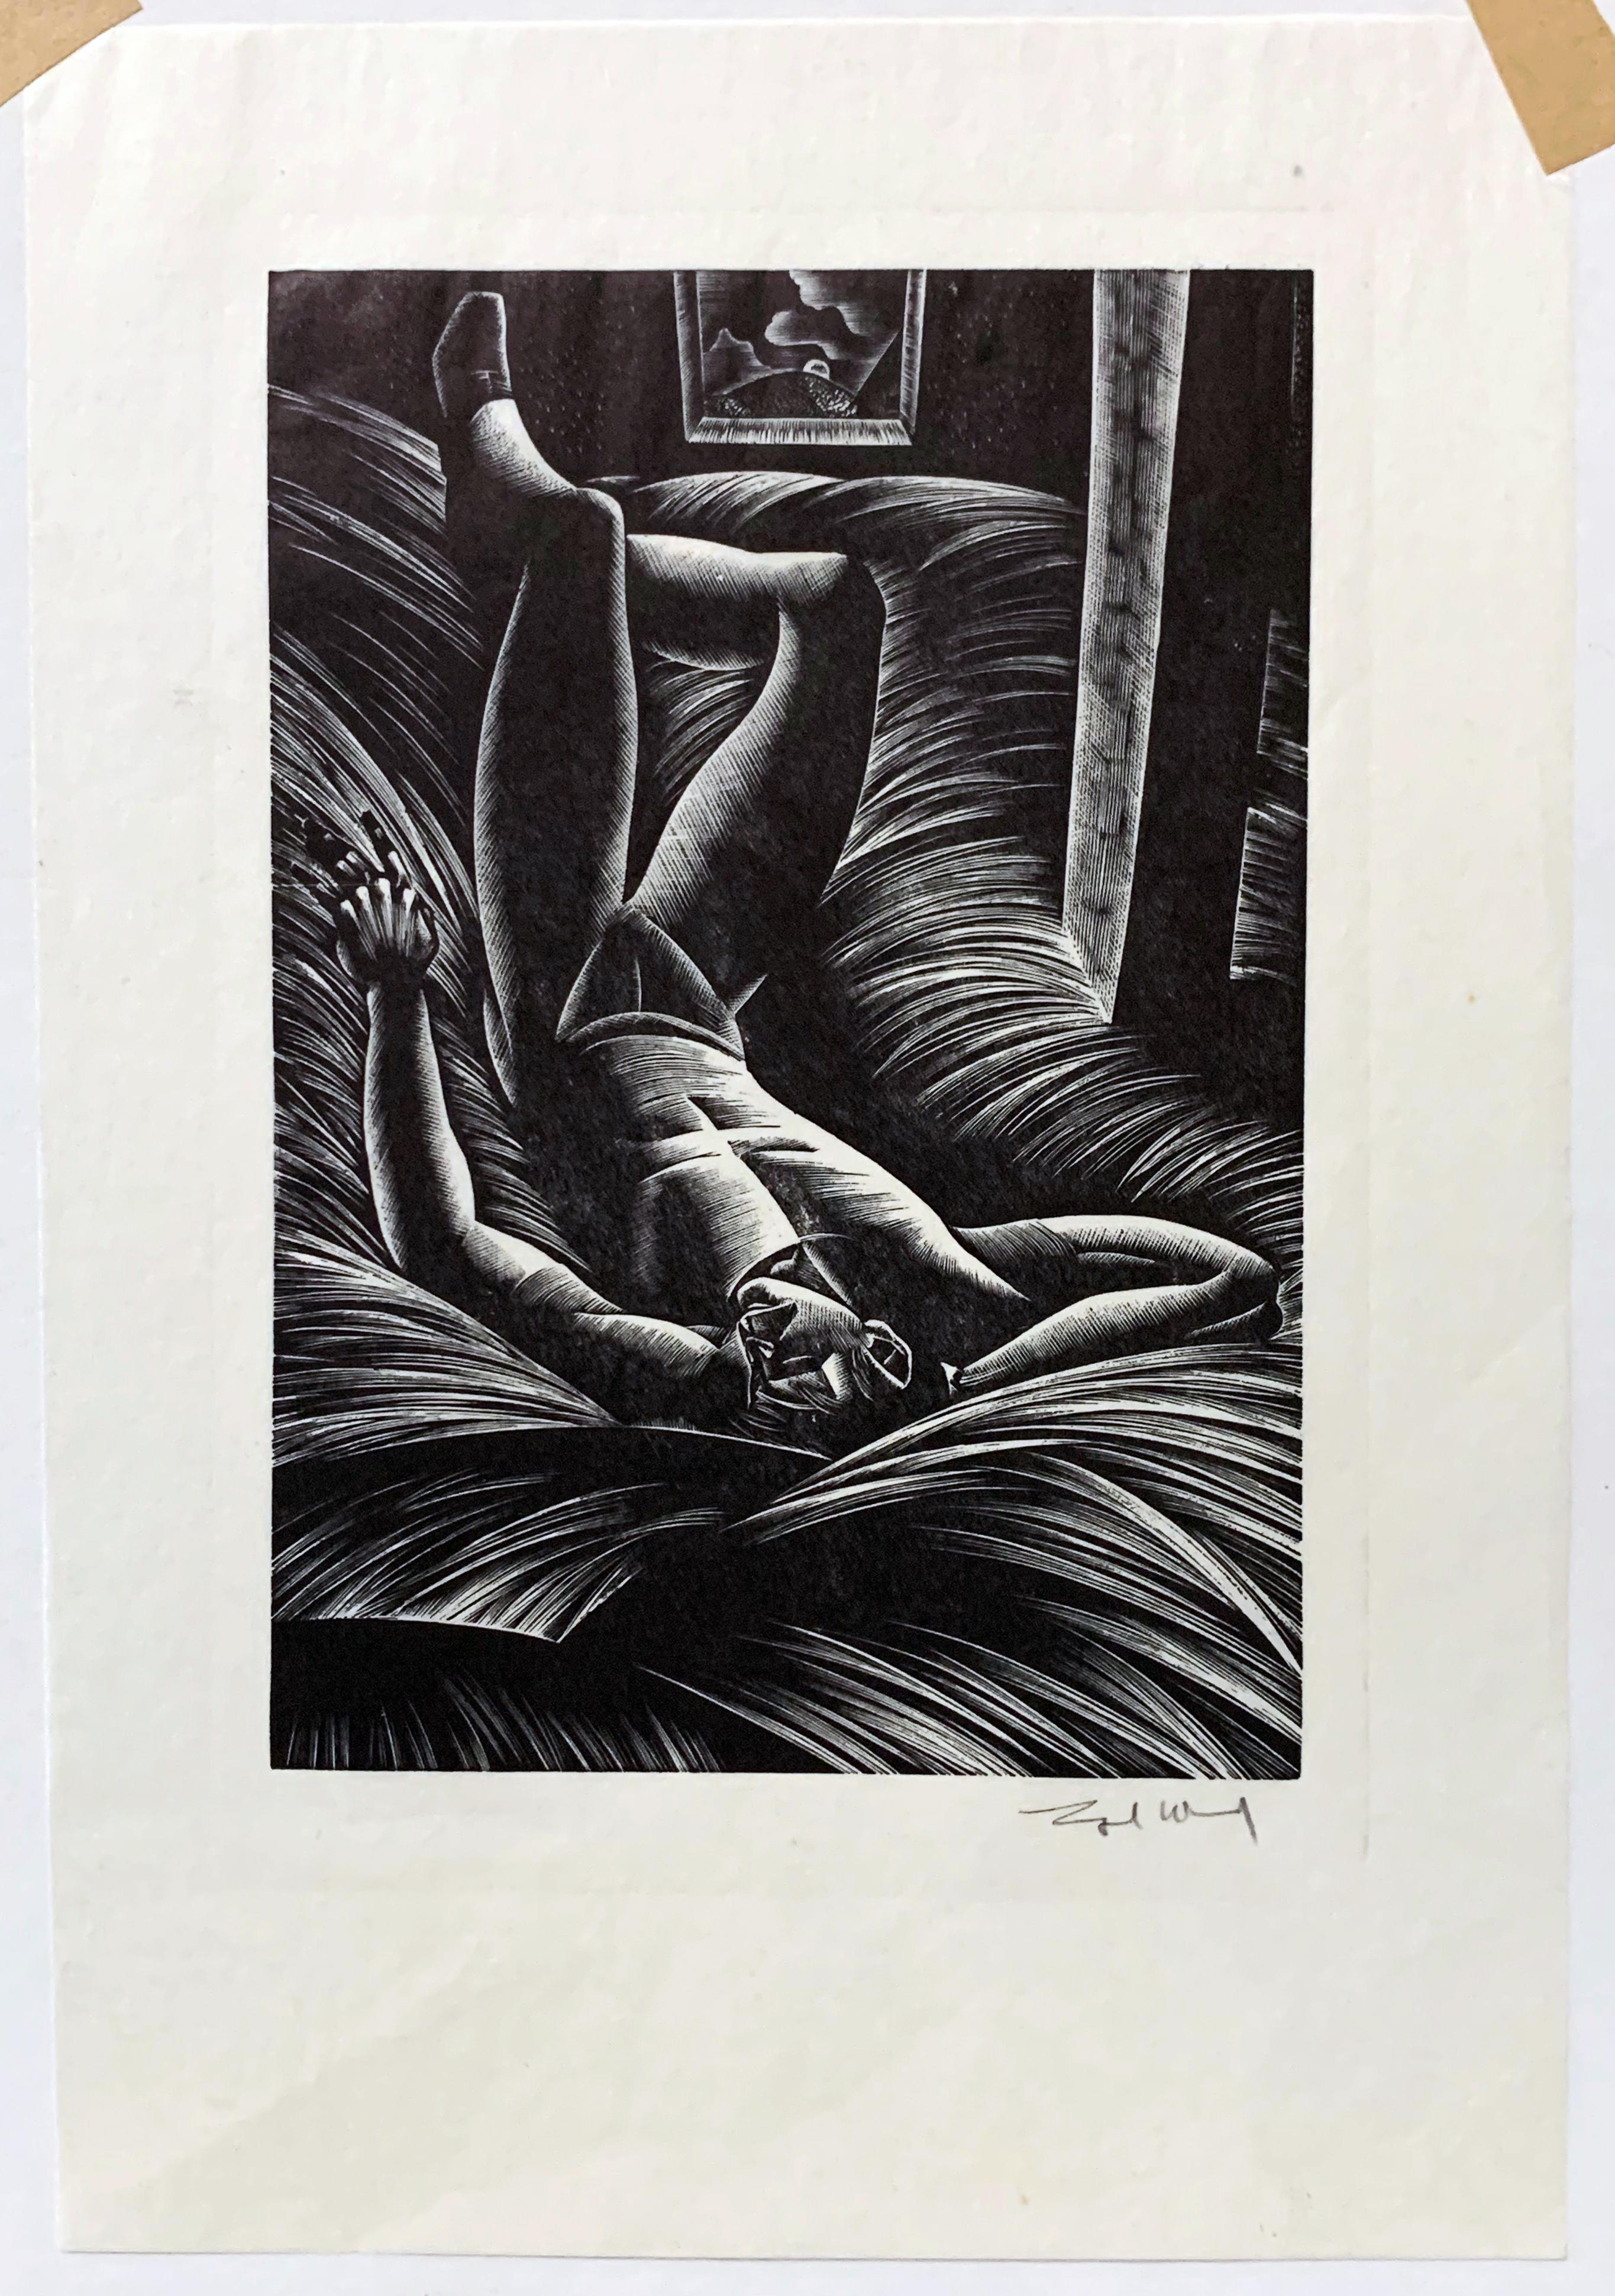 Famed for his woodcut book illustrations in the Art Deco era, Lynd Ward produced a series of dramatic images that reminded the reader of film noirs of the era, with spotlit figures in dark settings that seemed to presage flight, fear, hope and